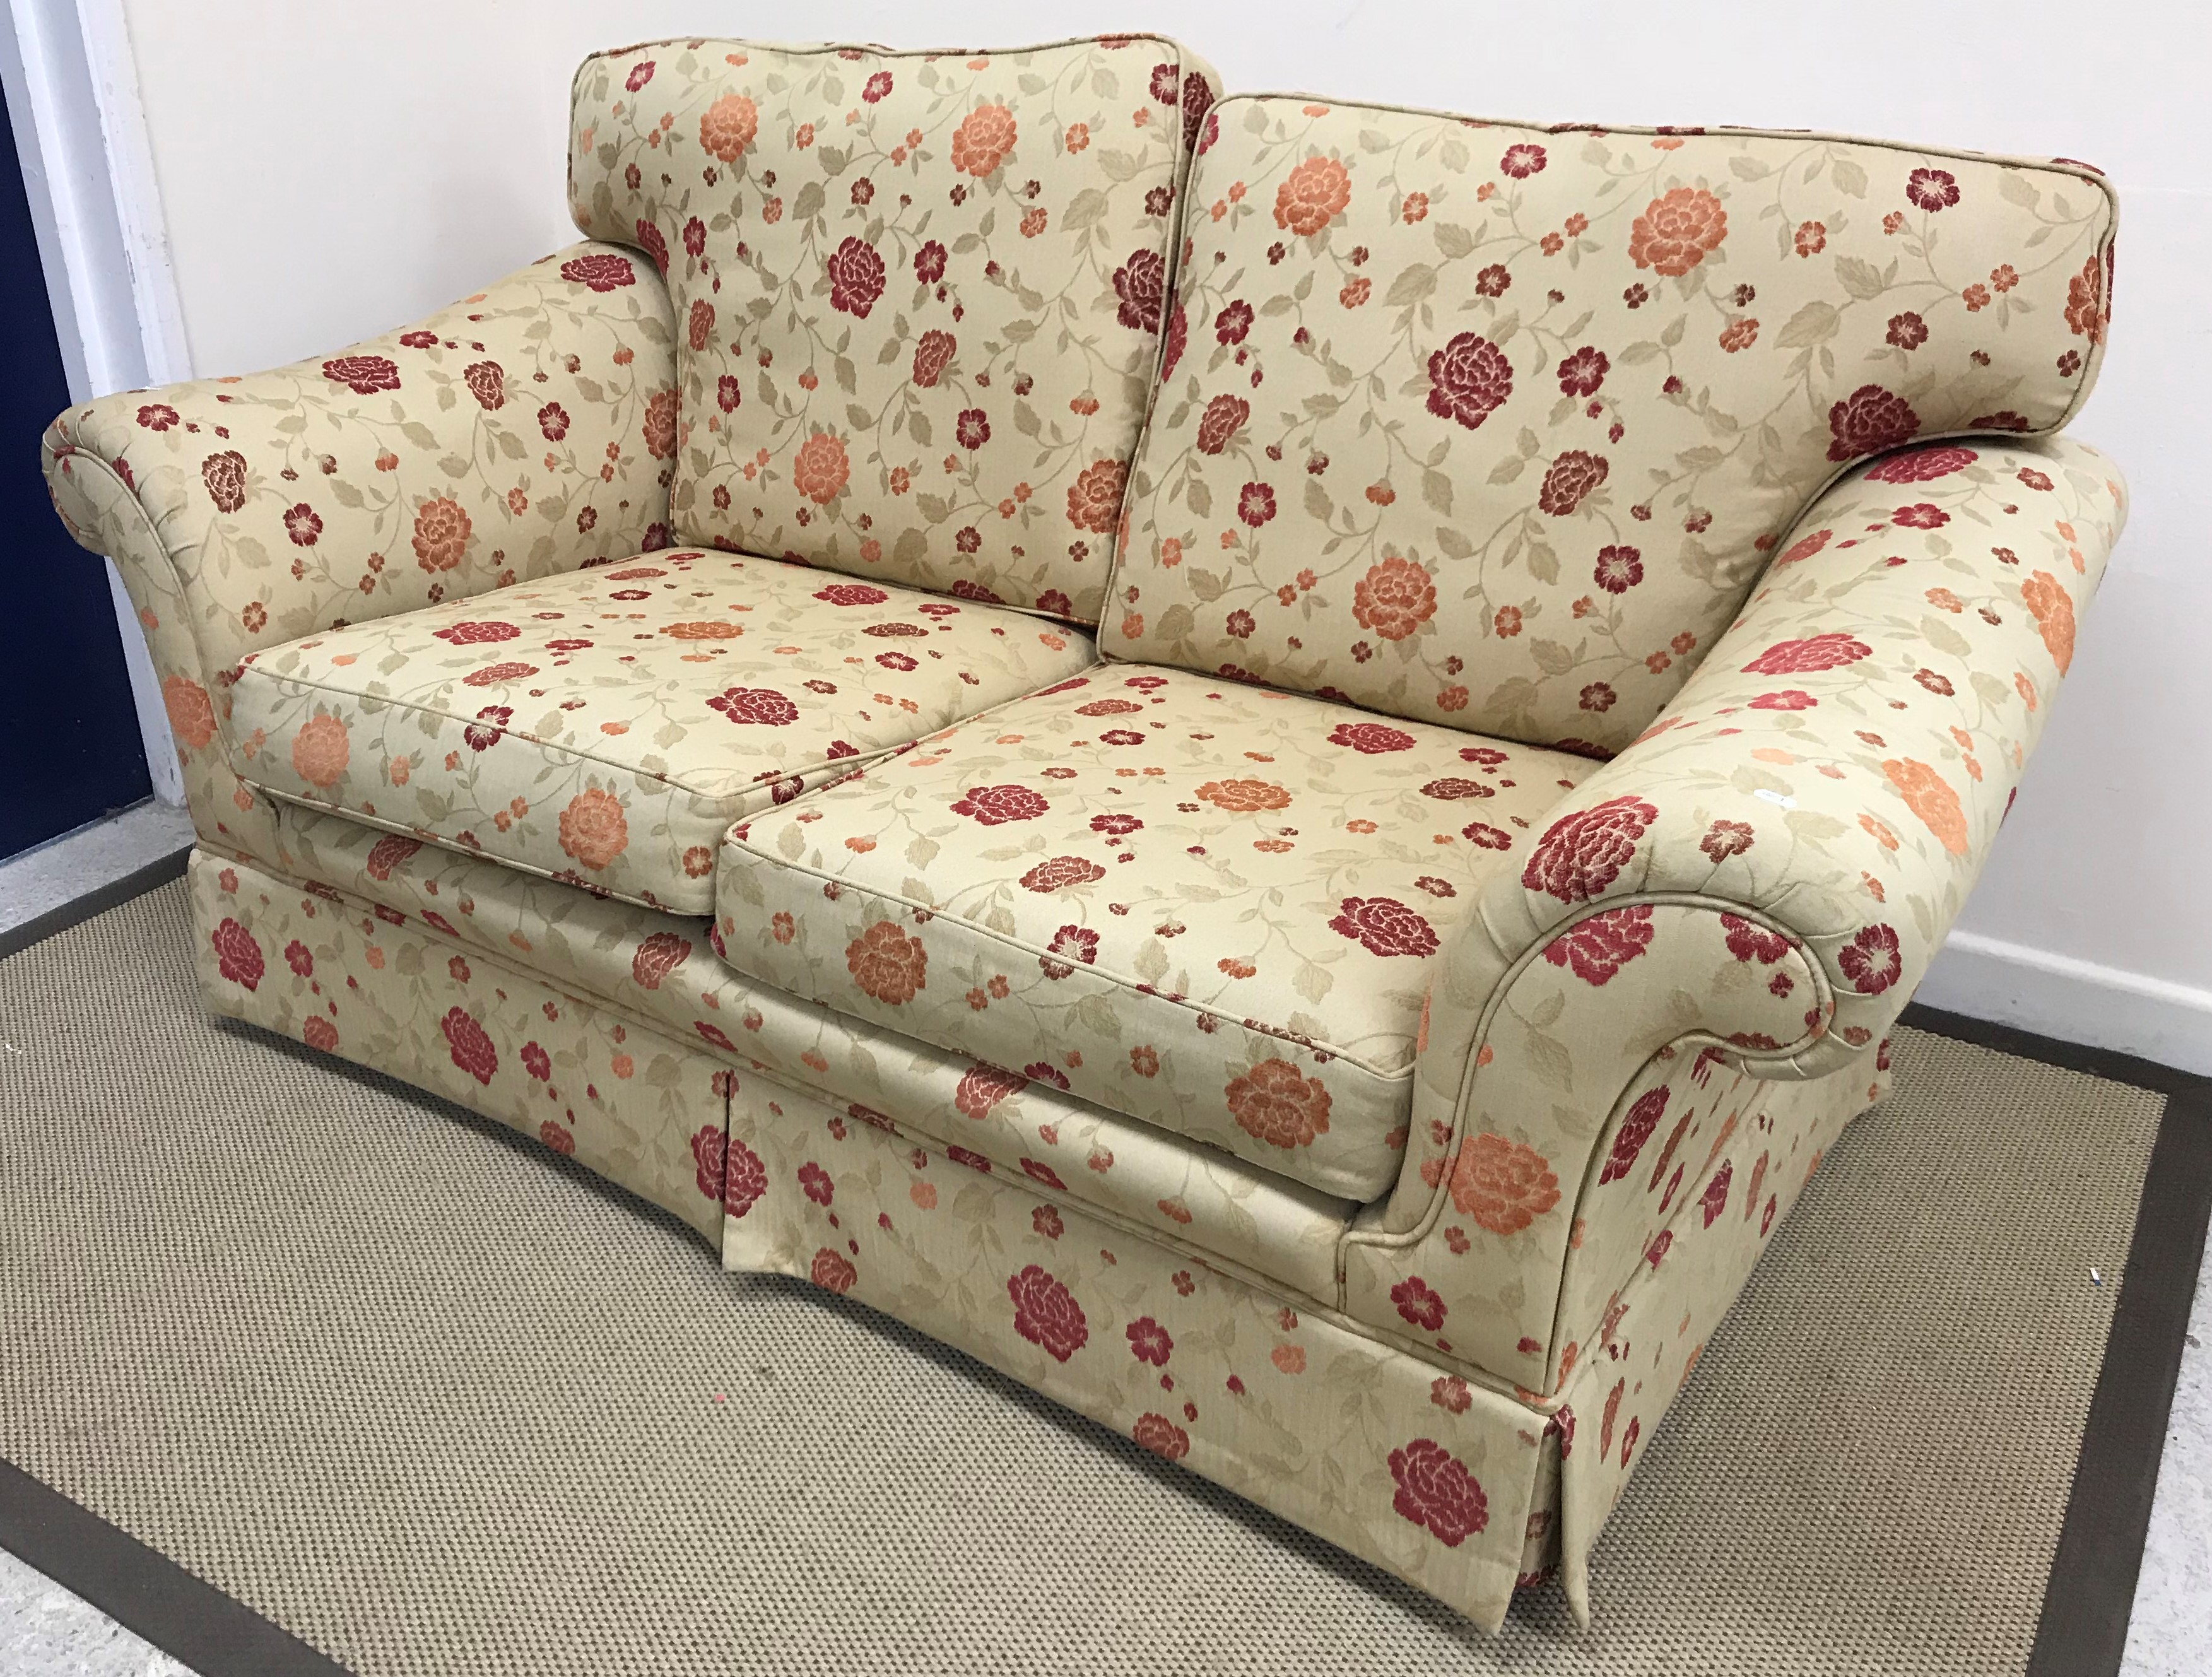 A Gainsborough floral upholstered two se - Image 2 of 2